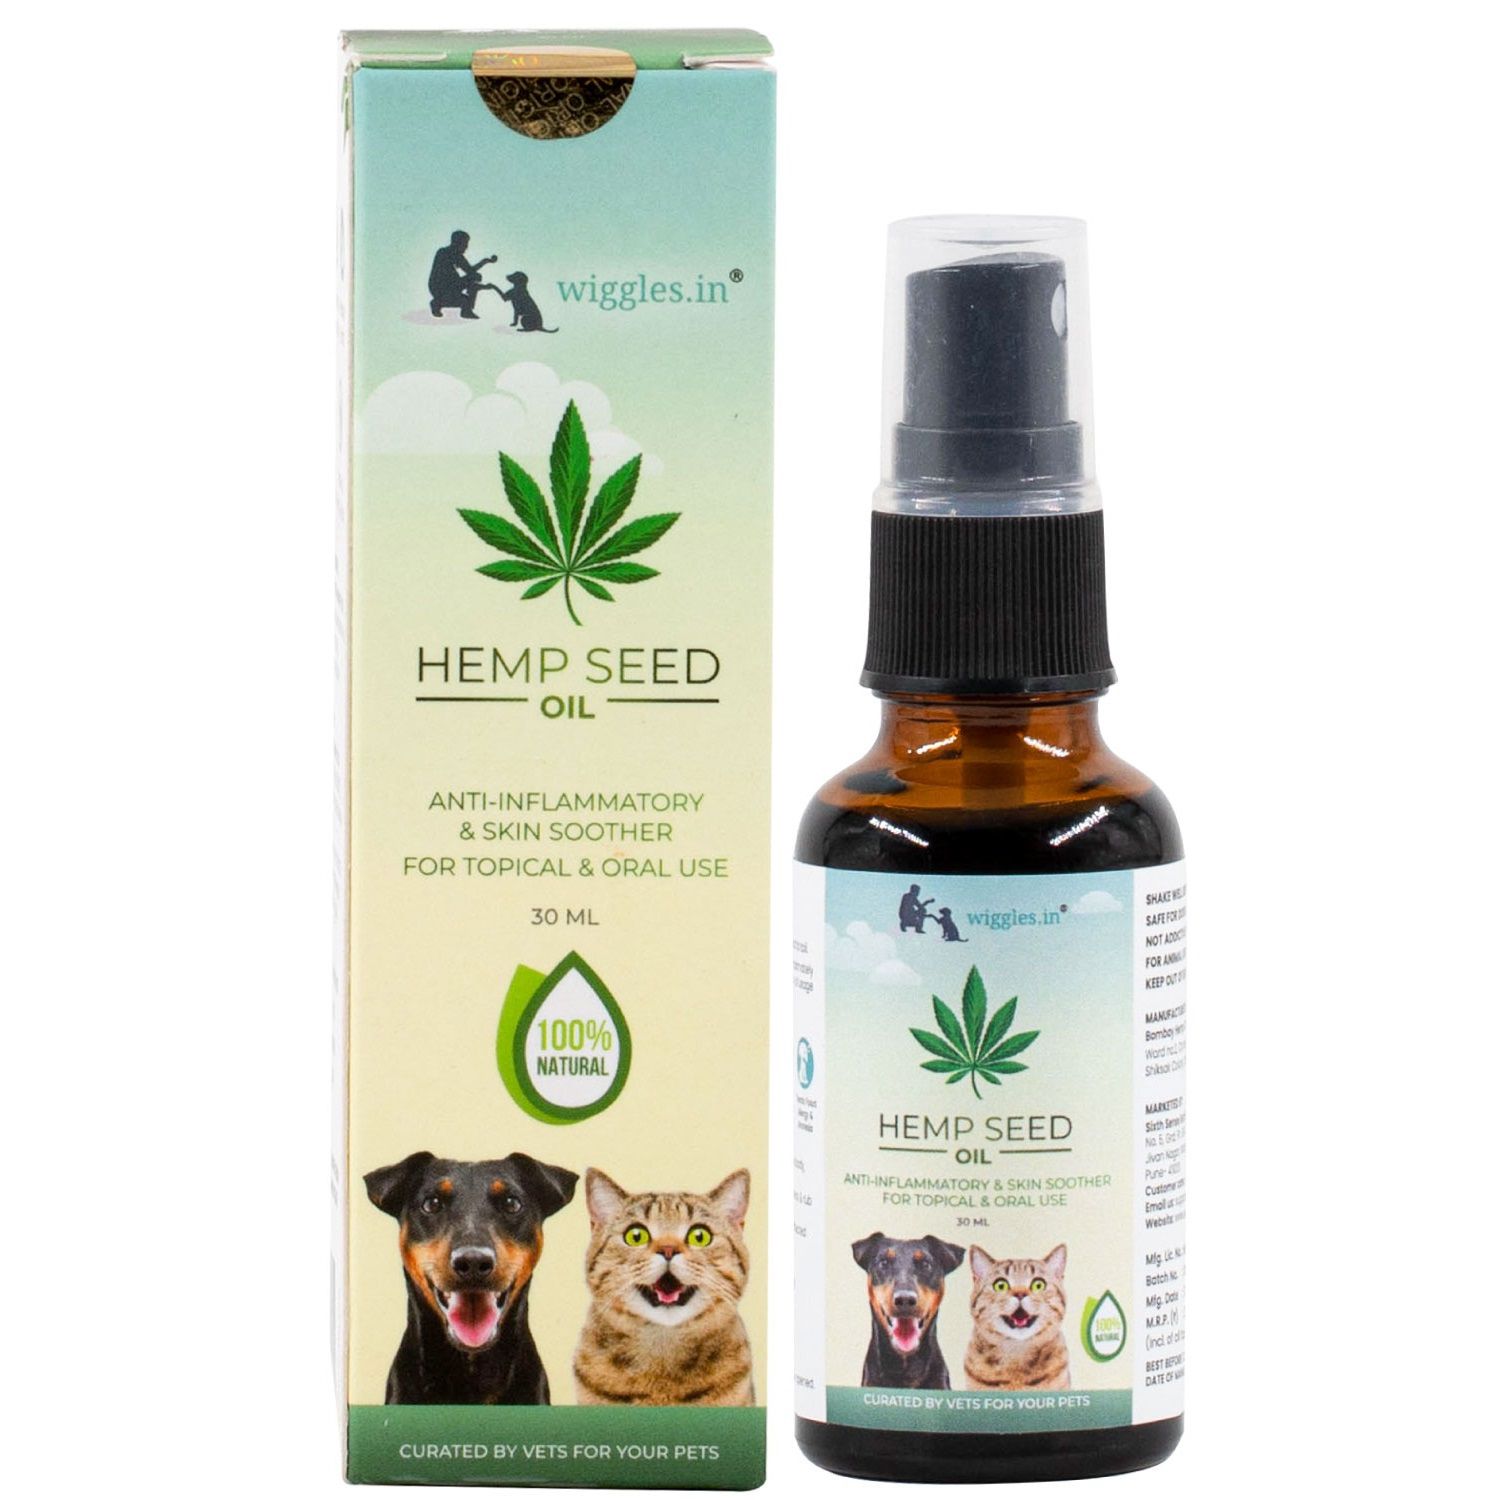     			Wiggles Hemp Seed Oil for Dogs Cats Pain Anxiety Relief, 30ml - Pet Joint Support Stress Calming Massage Oil - Skin Coat Allergies Care Herbal Extract (Pack of 1)